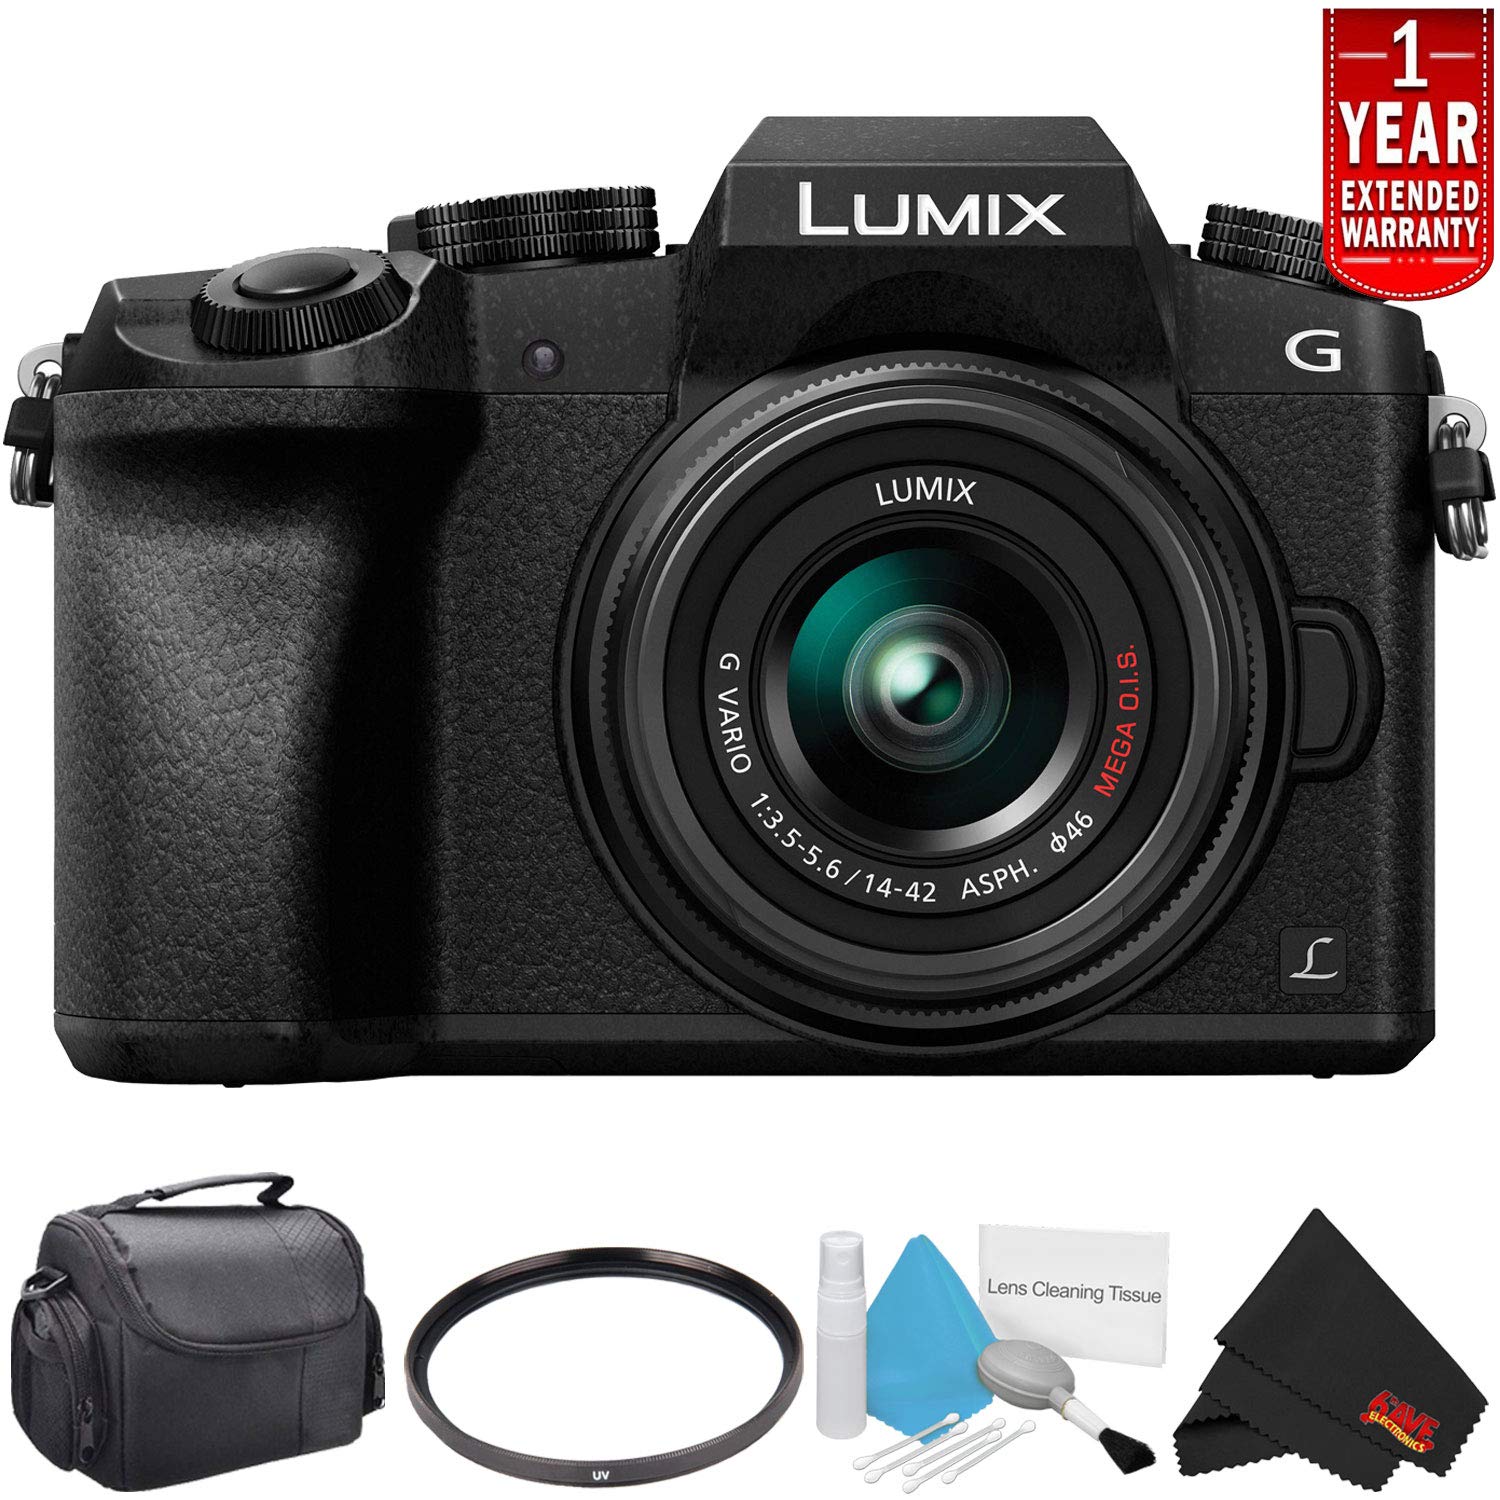 Panasonic Lumix DMC-G7 Mirrorless Digital Camera with 14-42mm Lens - Starter Bundle with 1 Year Extended Warranty